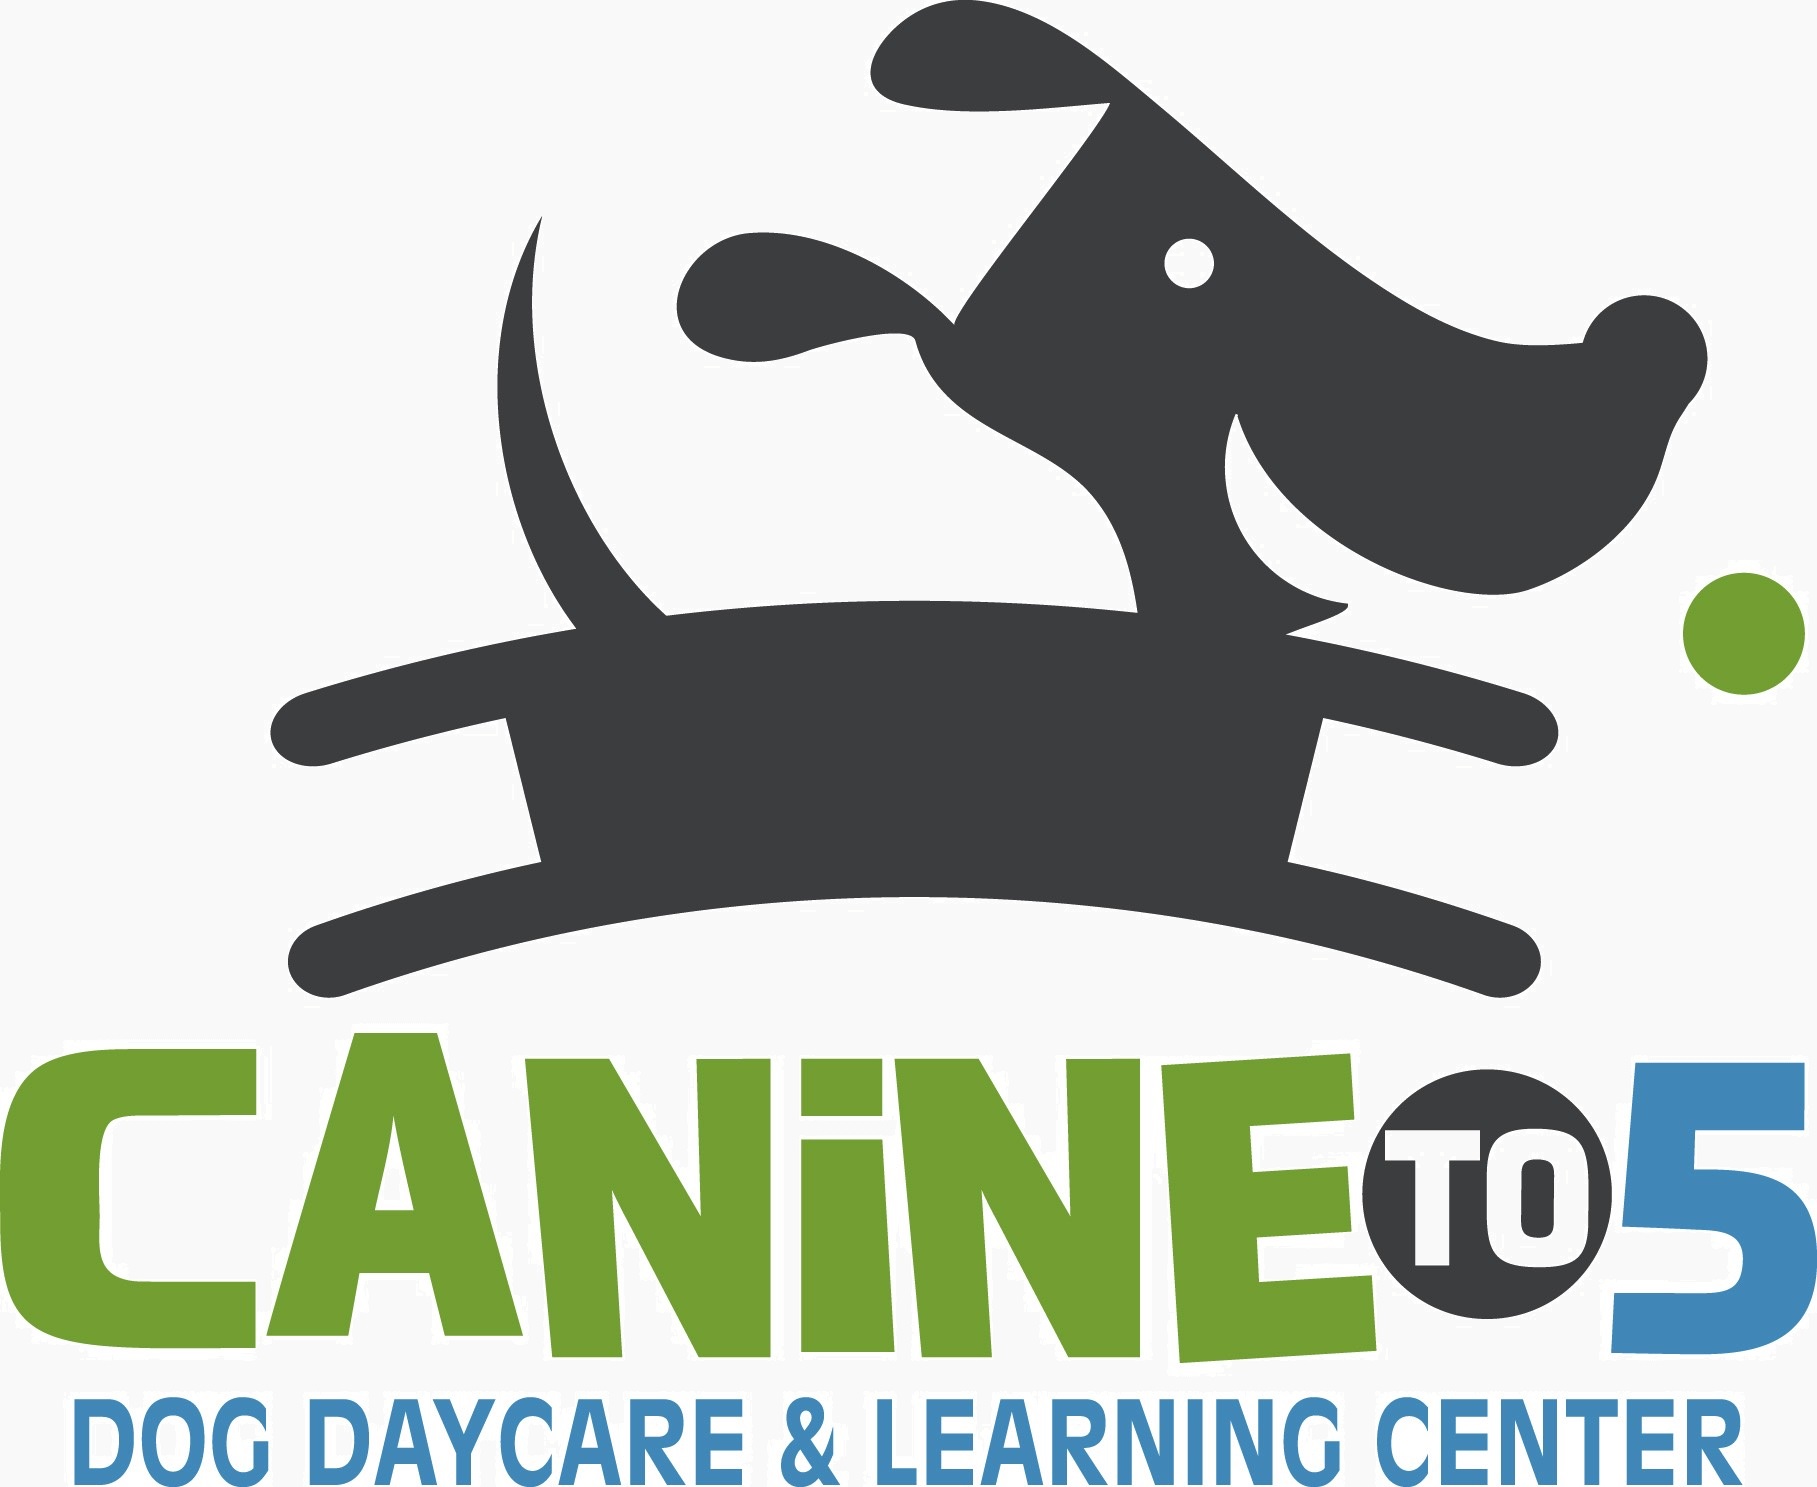 Canine to 5 Daycare